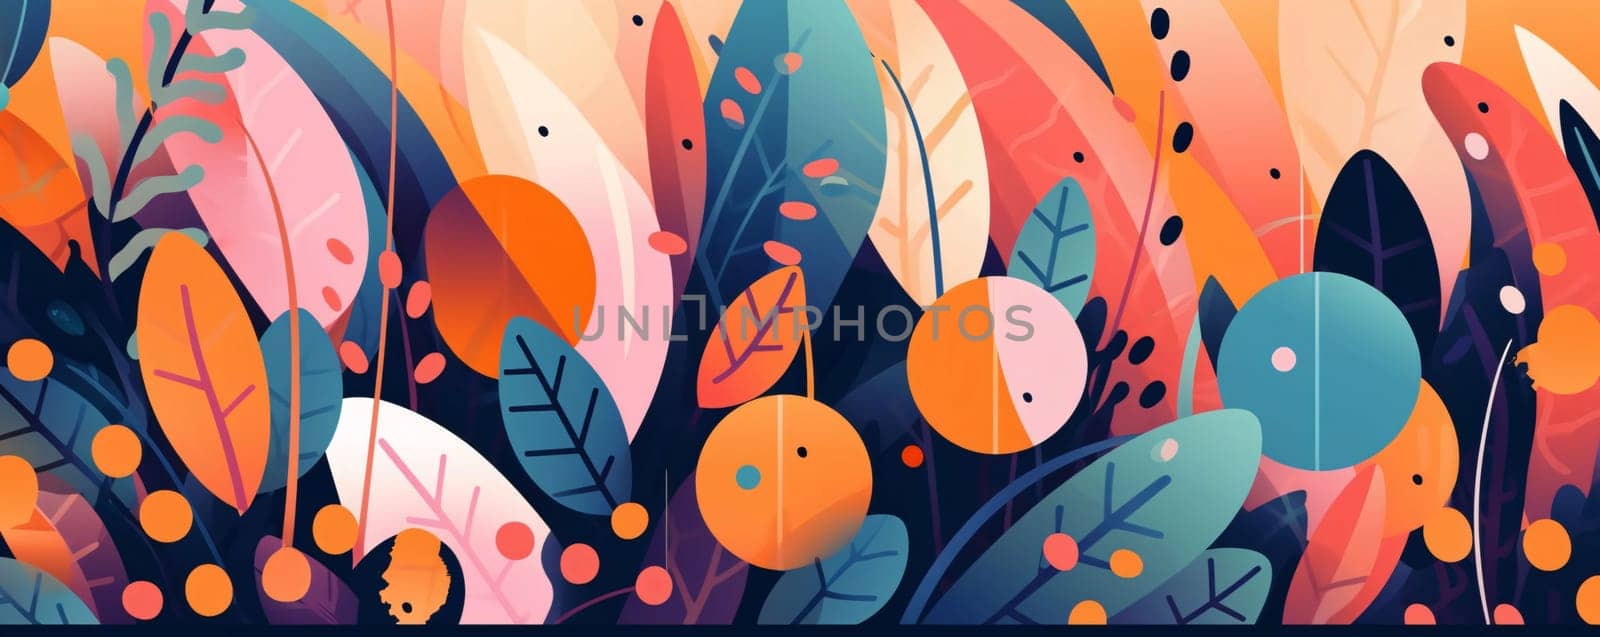 Abstract floral background with leaves. Vector illustration in flat cartoon style. by ThemesS